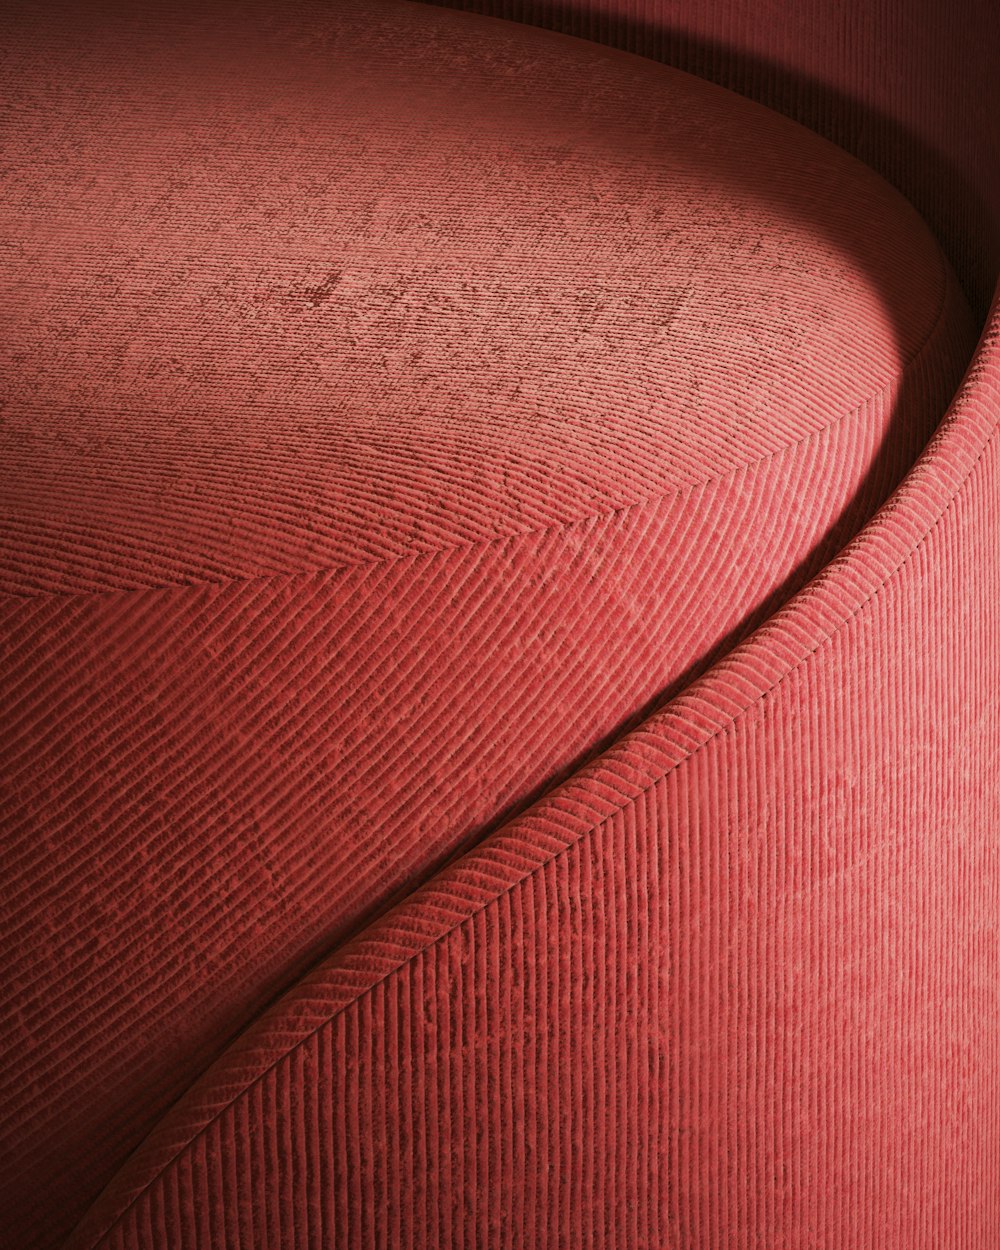 a close up of a red chair with a curved seat